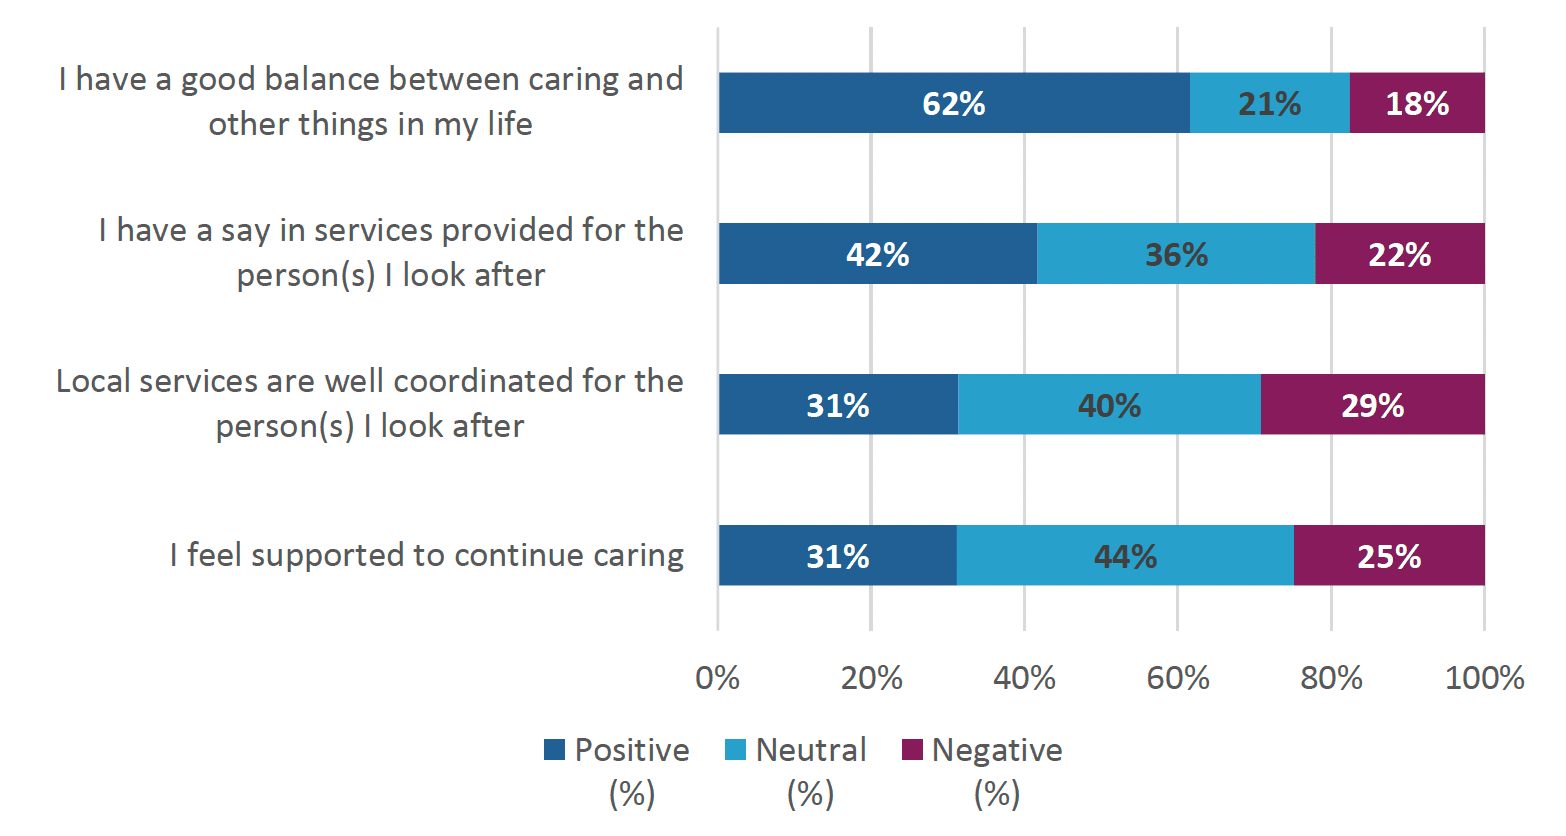 62% of carers agree with the statement ‘I have a good balance between caring and other things in my life.